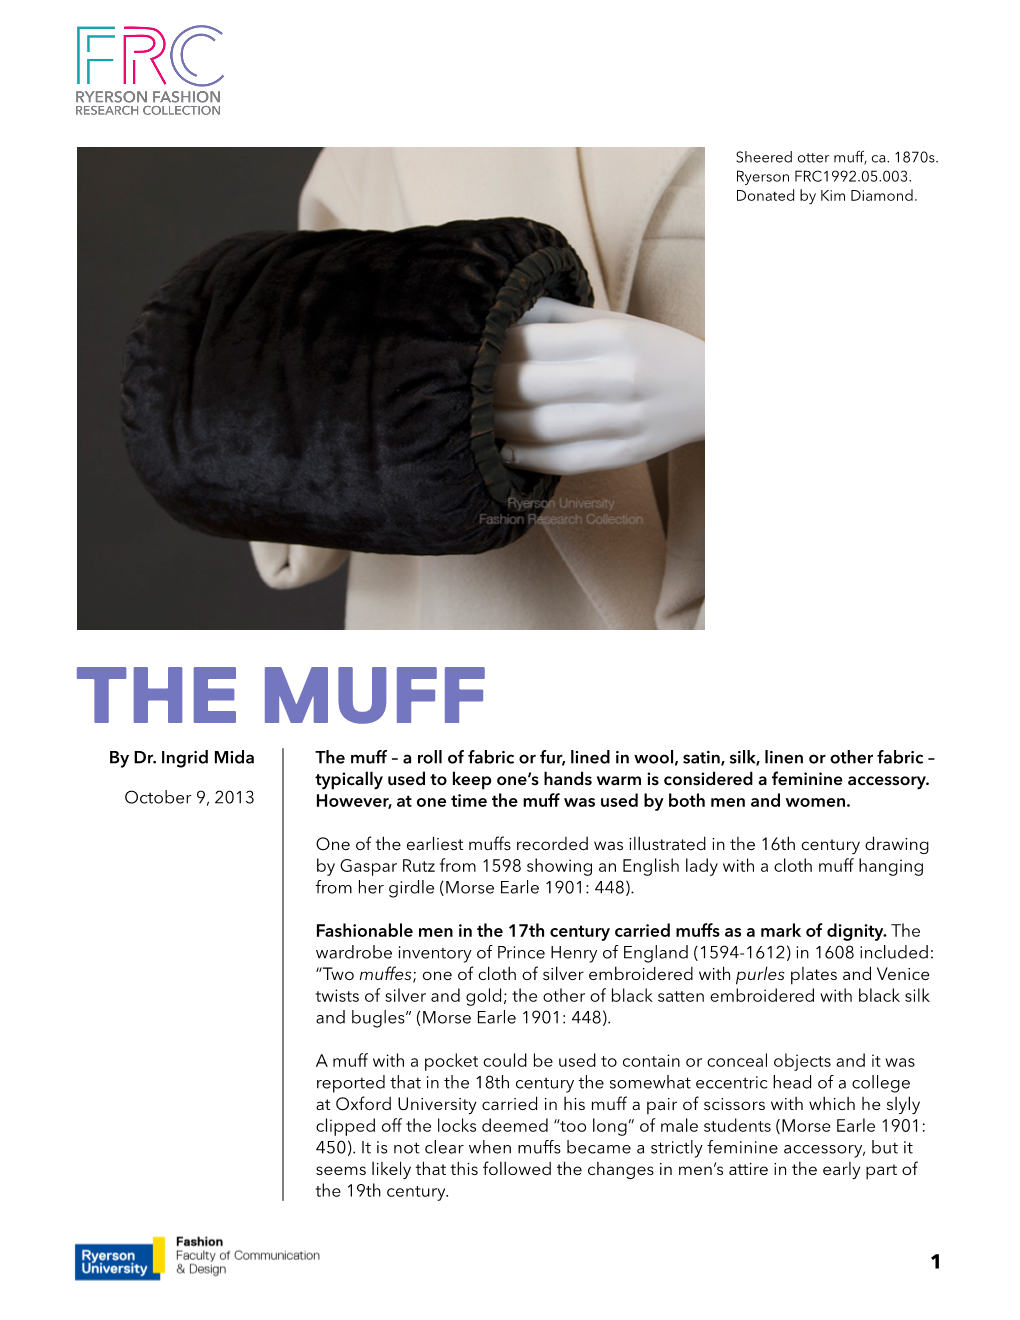 THE MUFF by Dr